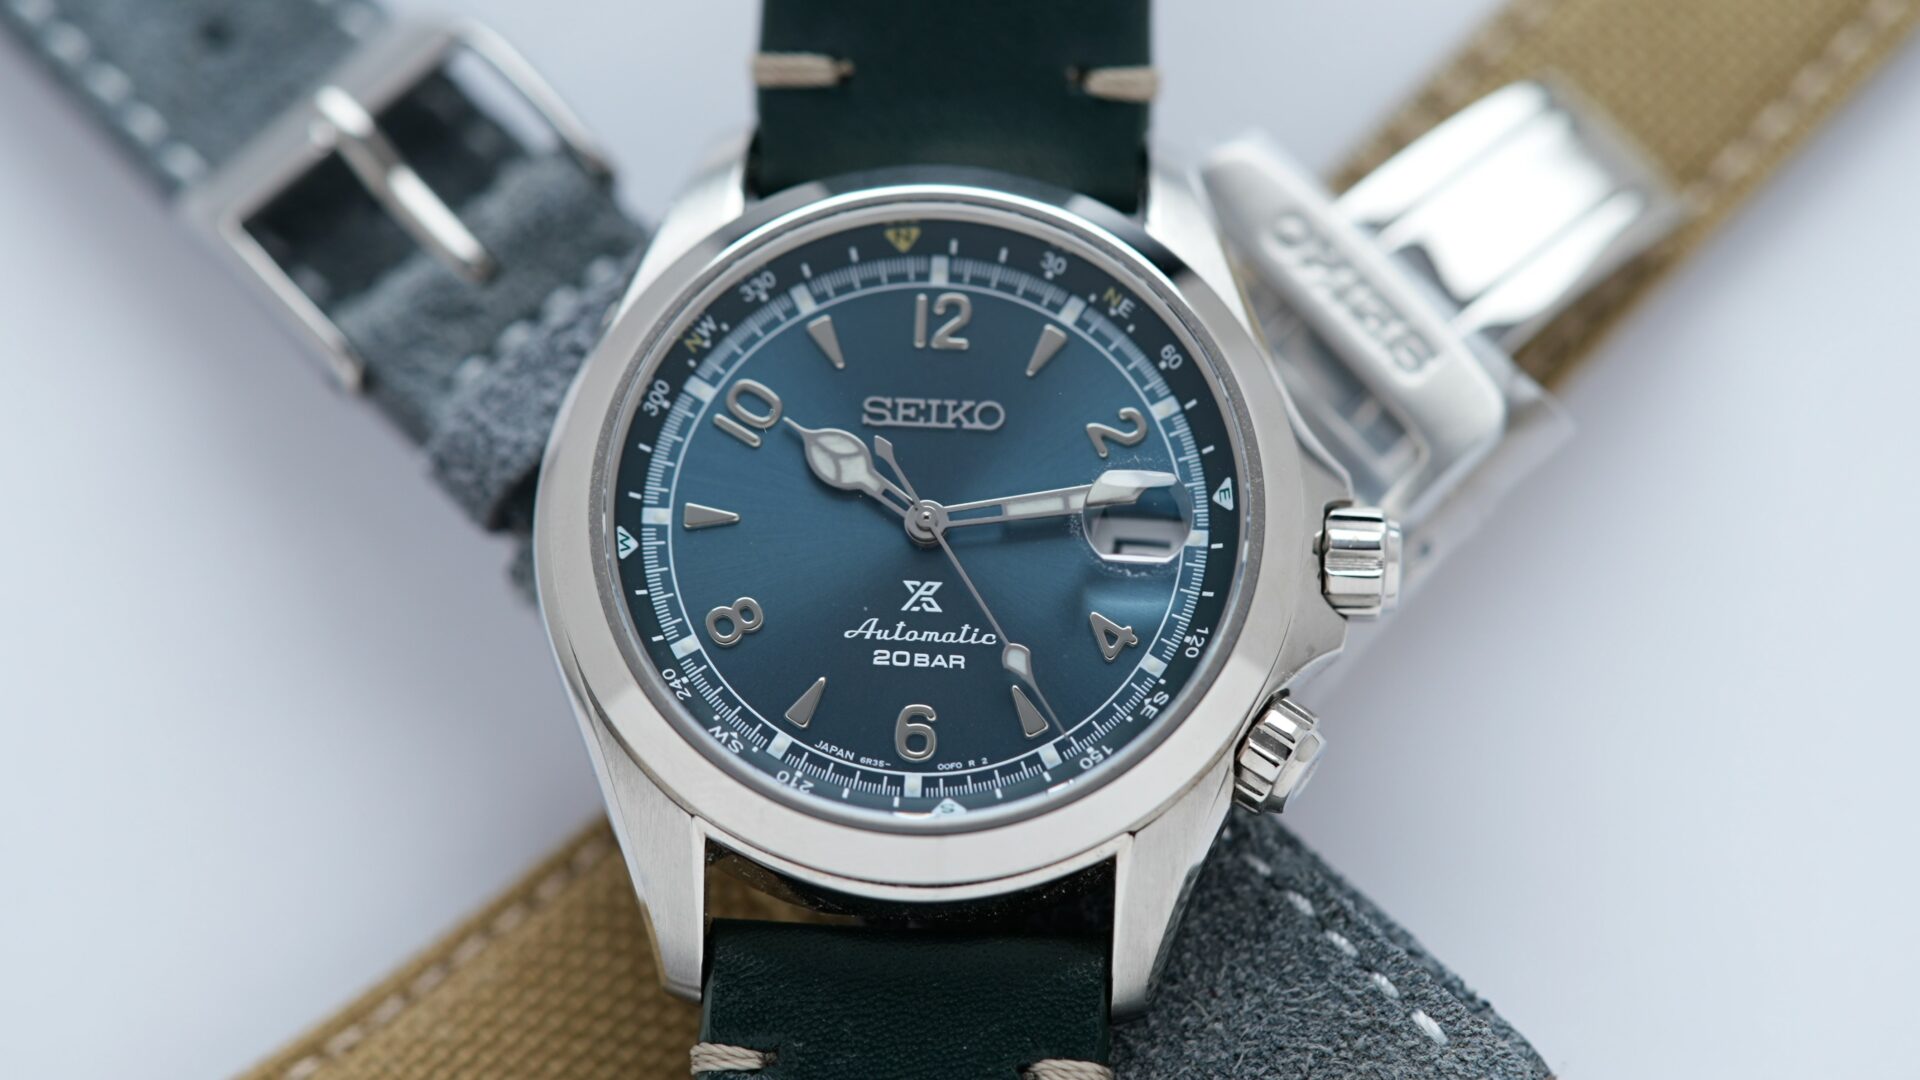 Seiko Alpinist Limited Edition Alpinist Mountain Glacier SPB199J1 watch on display along with two additional straps in the background.